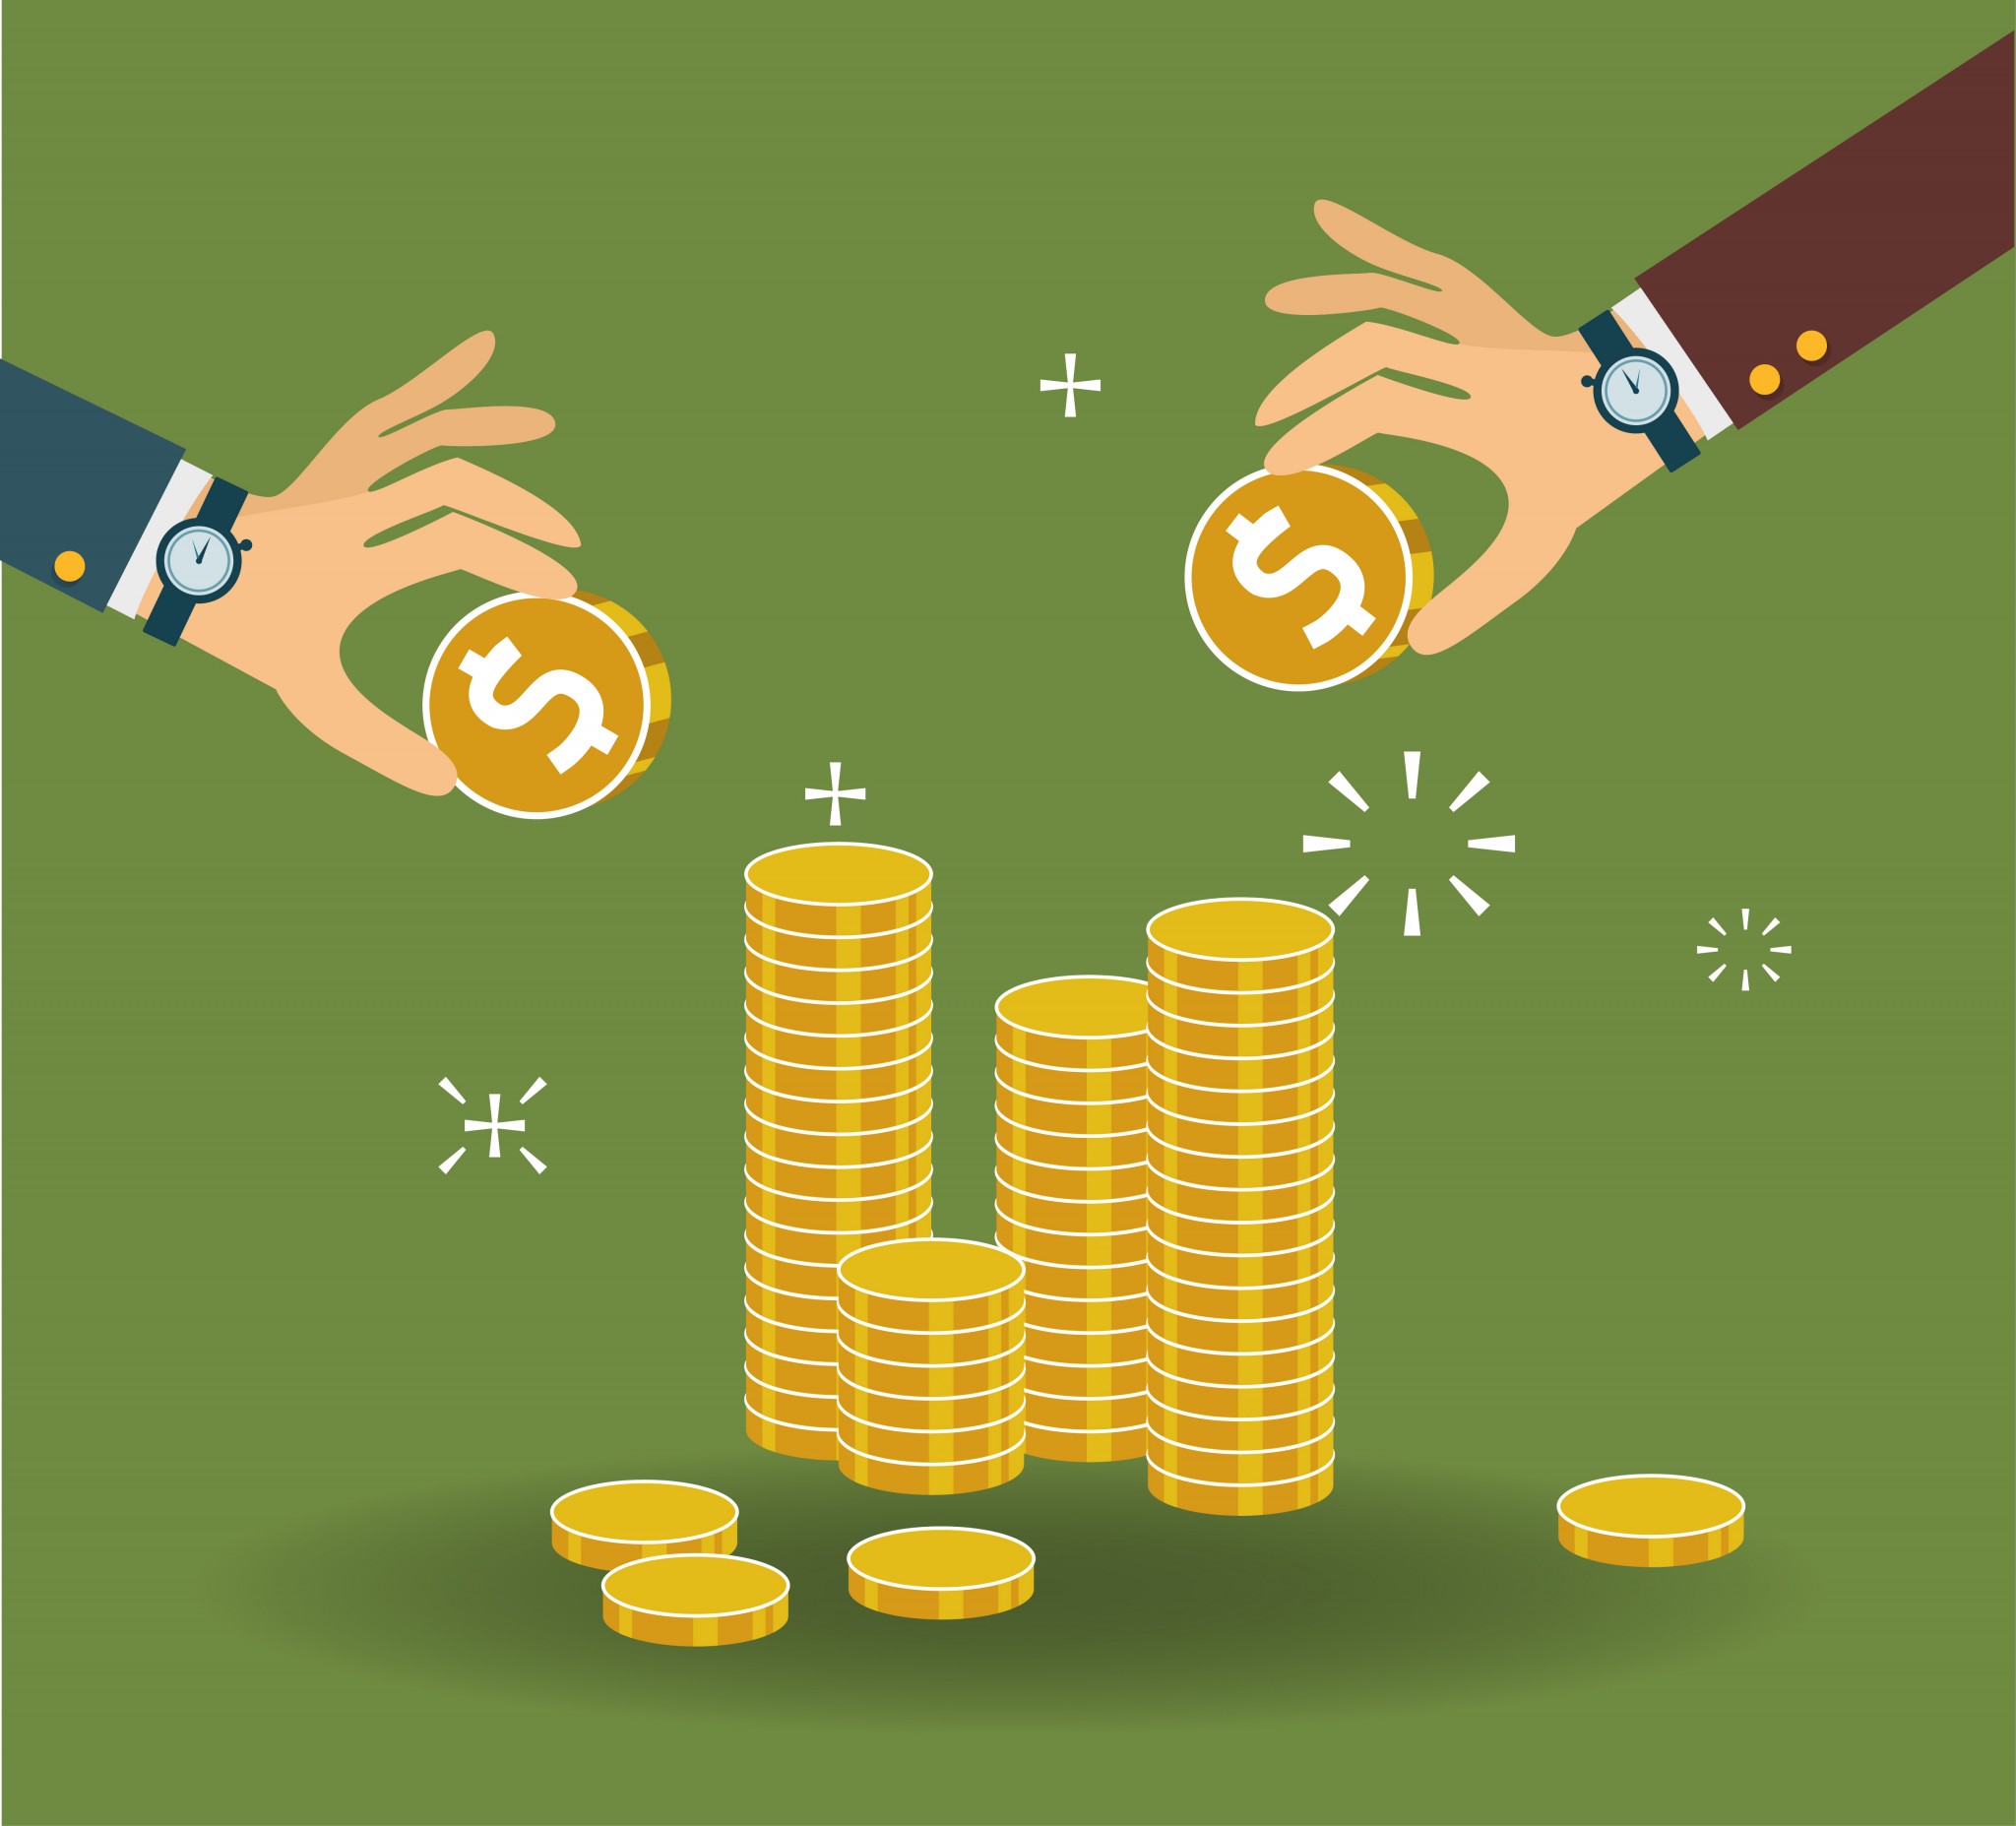 Illustration of of two hands placing coins over a stack of coins - represents that your joint venture agreement should discuss the required deposits